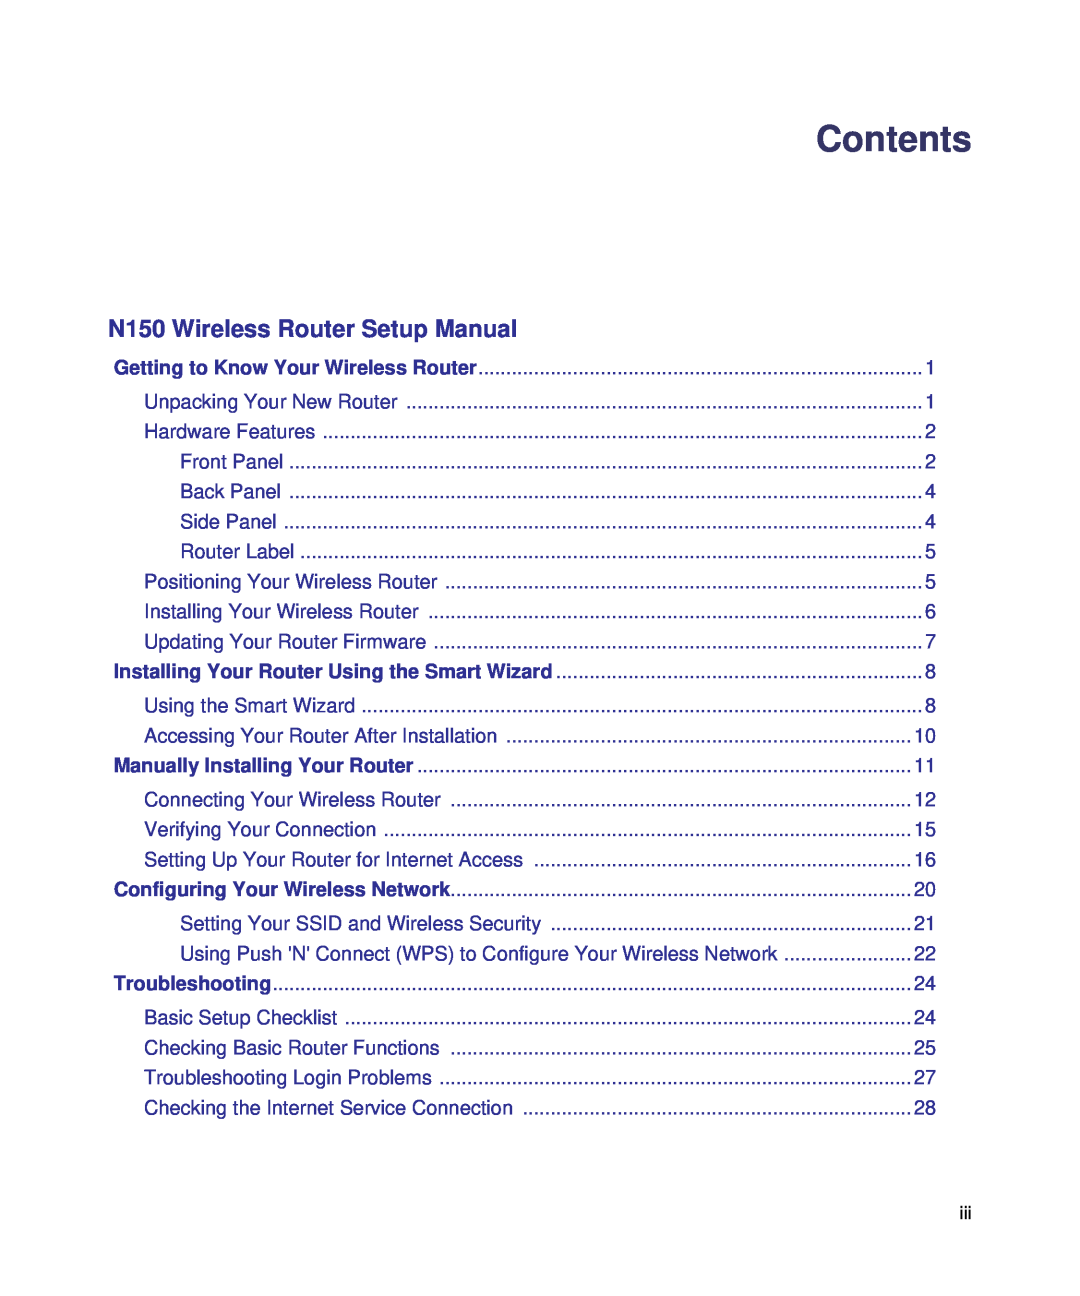 NETGEAR manual Contents, N150 Wireless Router Setup Manual, Using Push N Connect WPS to Configure Your Wireless Network 